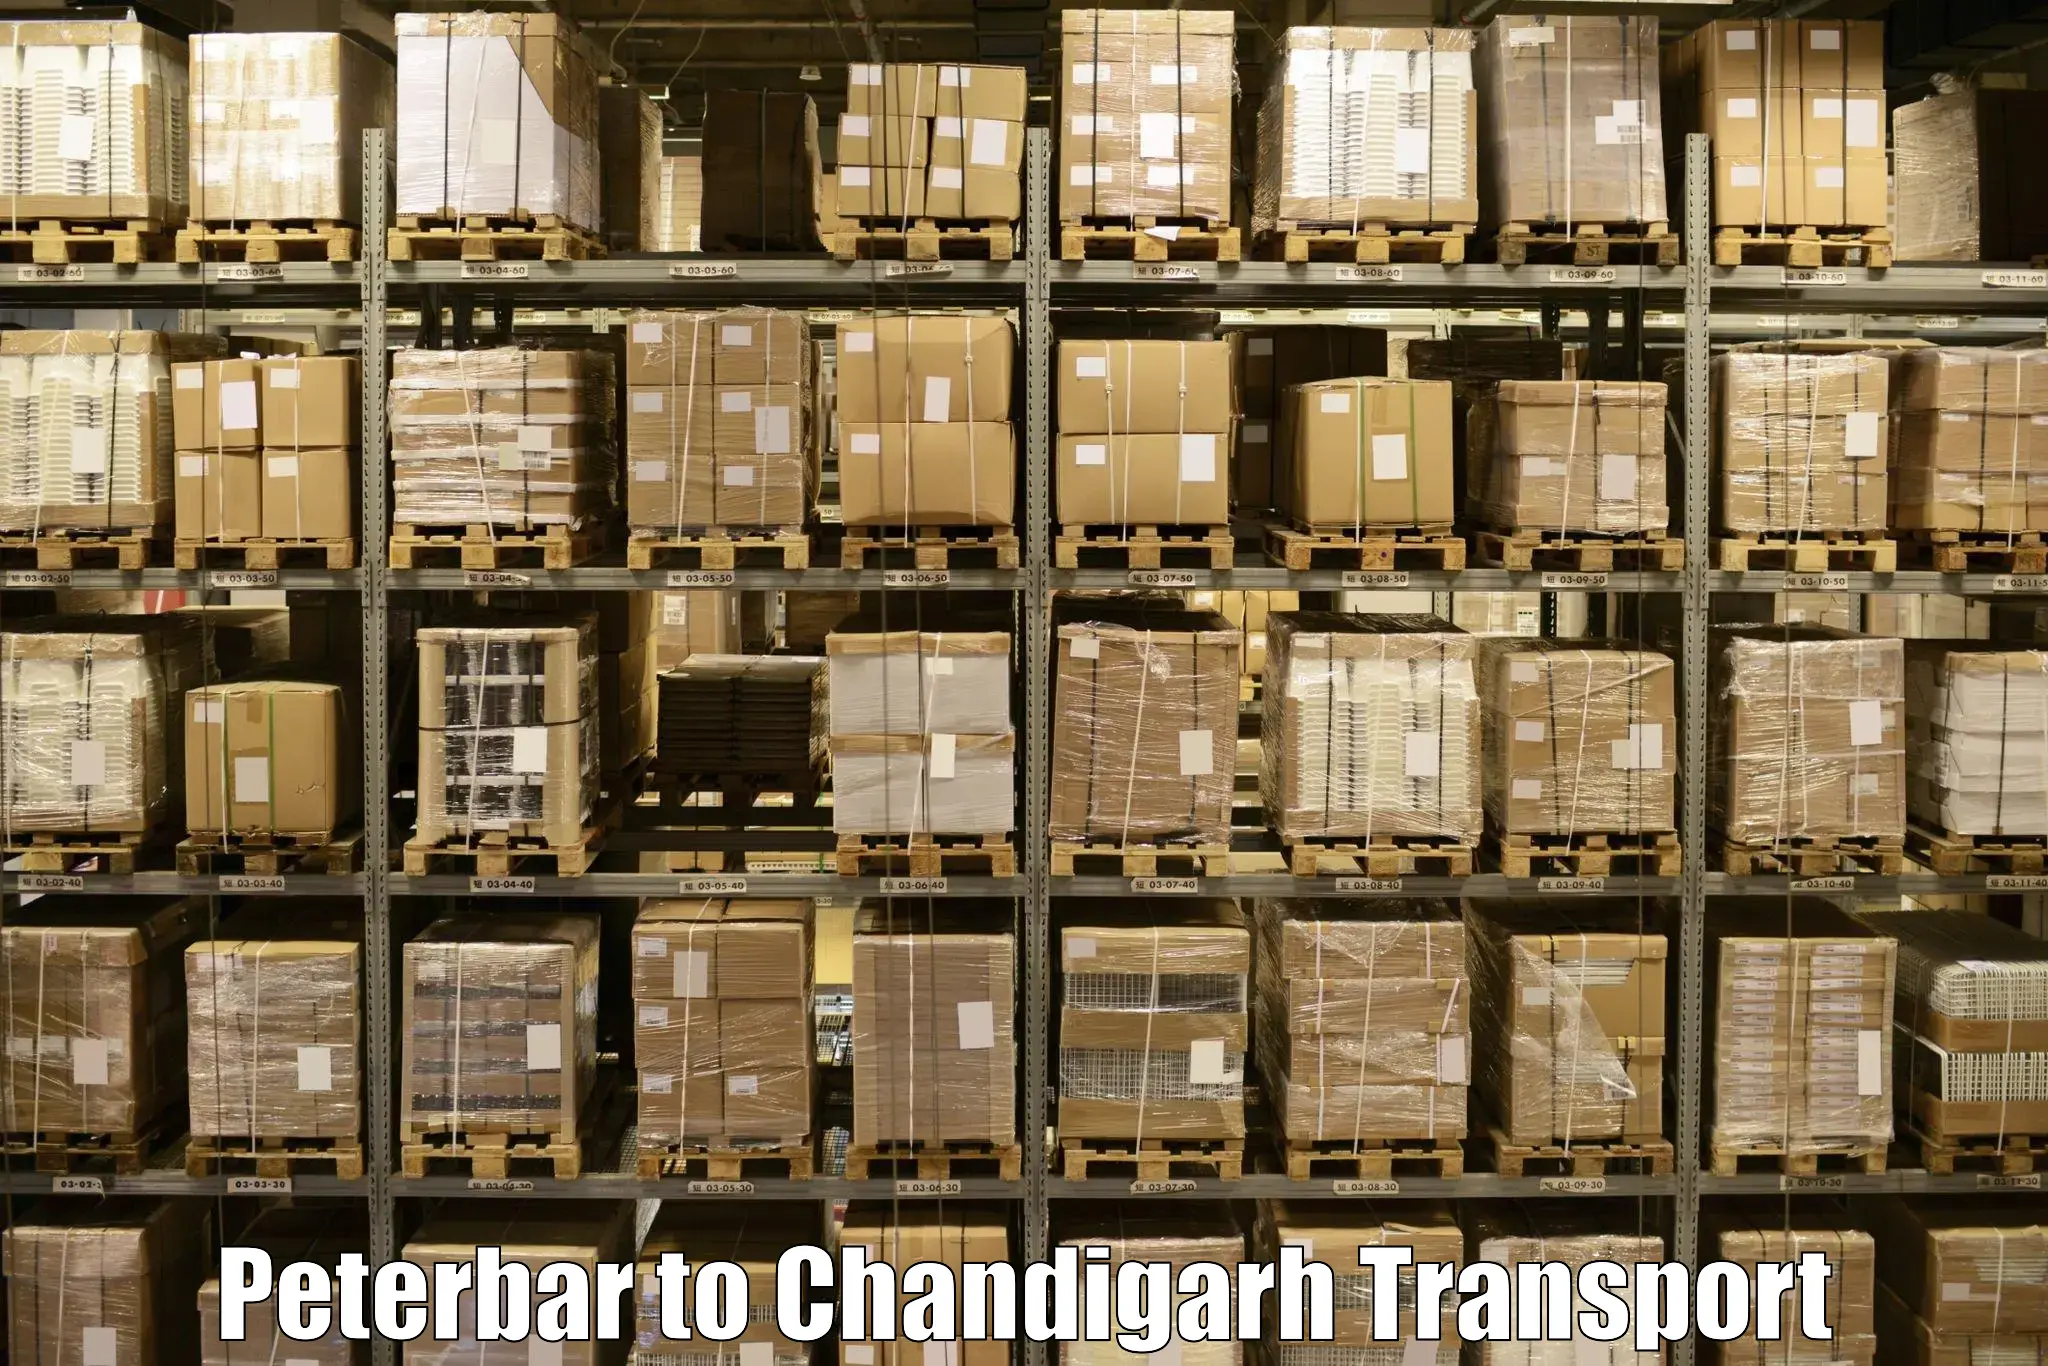 Cargo train transport services in Peterbar to Chandigarh